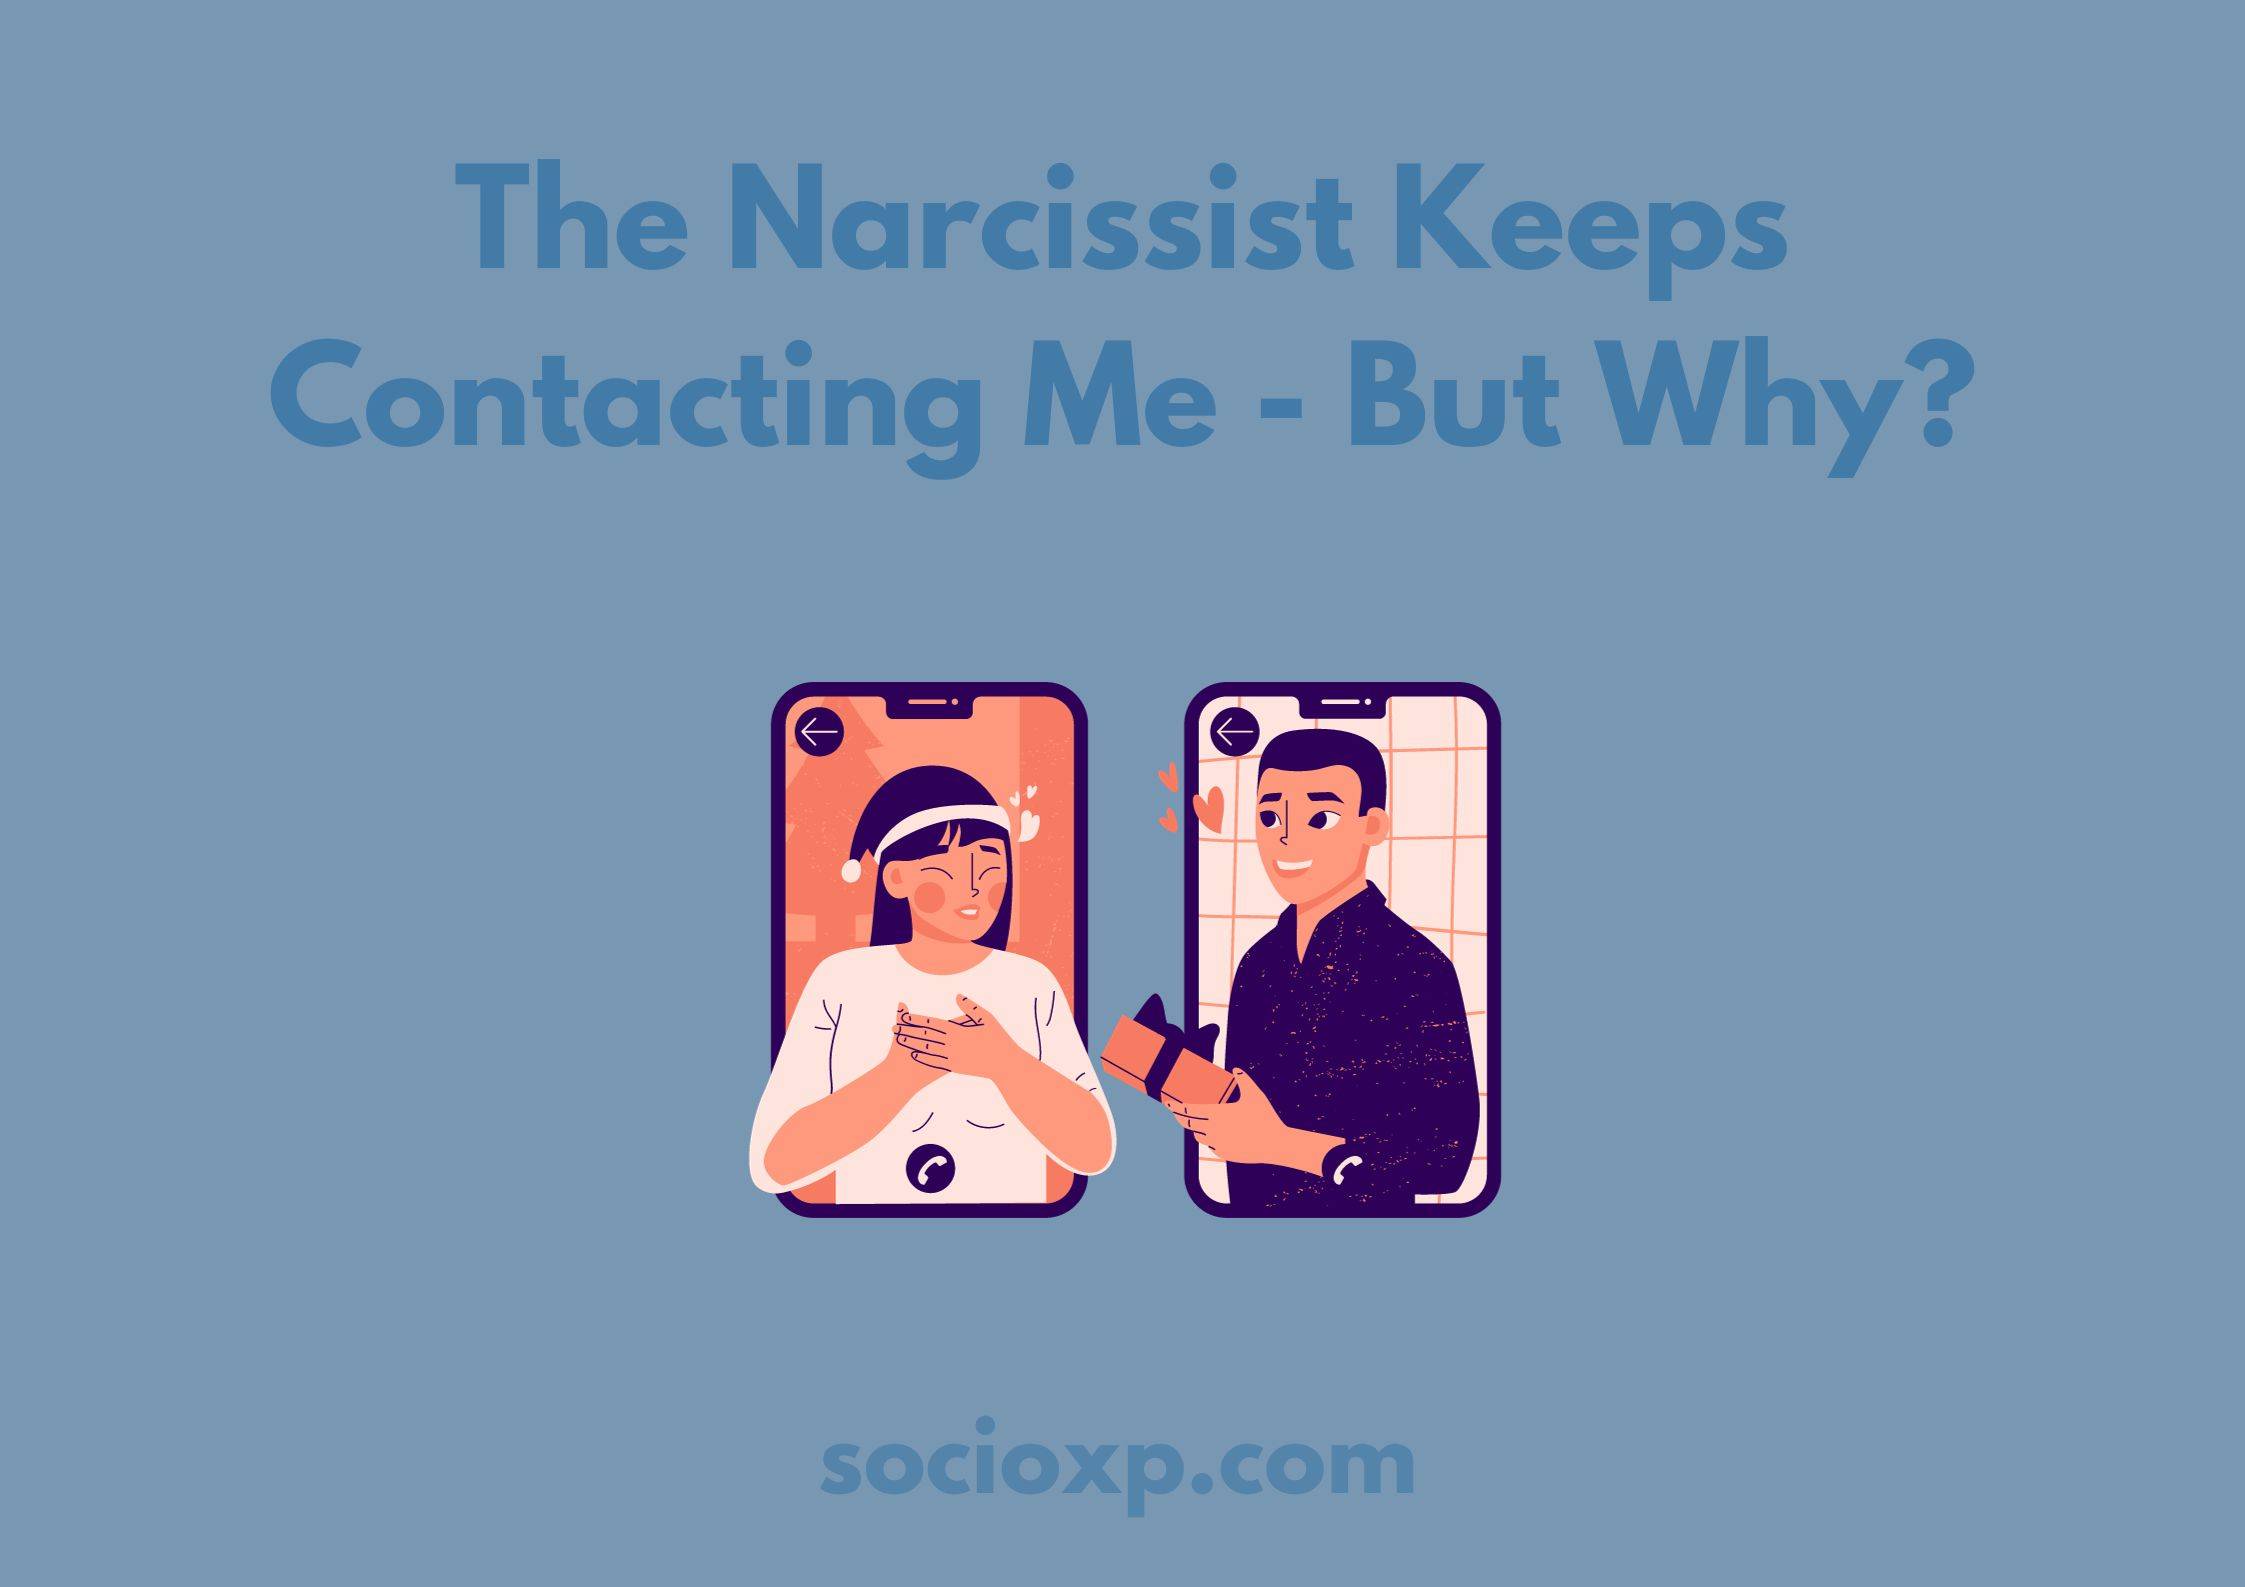 The Narcissist Keeps Contacting Me - But Why?